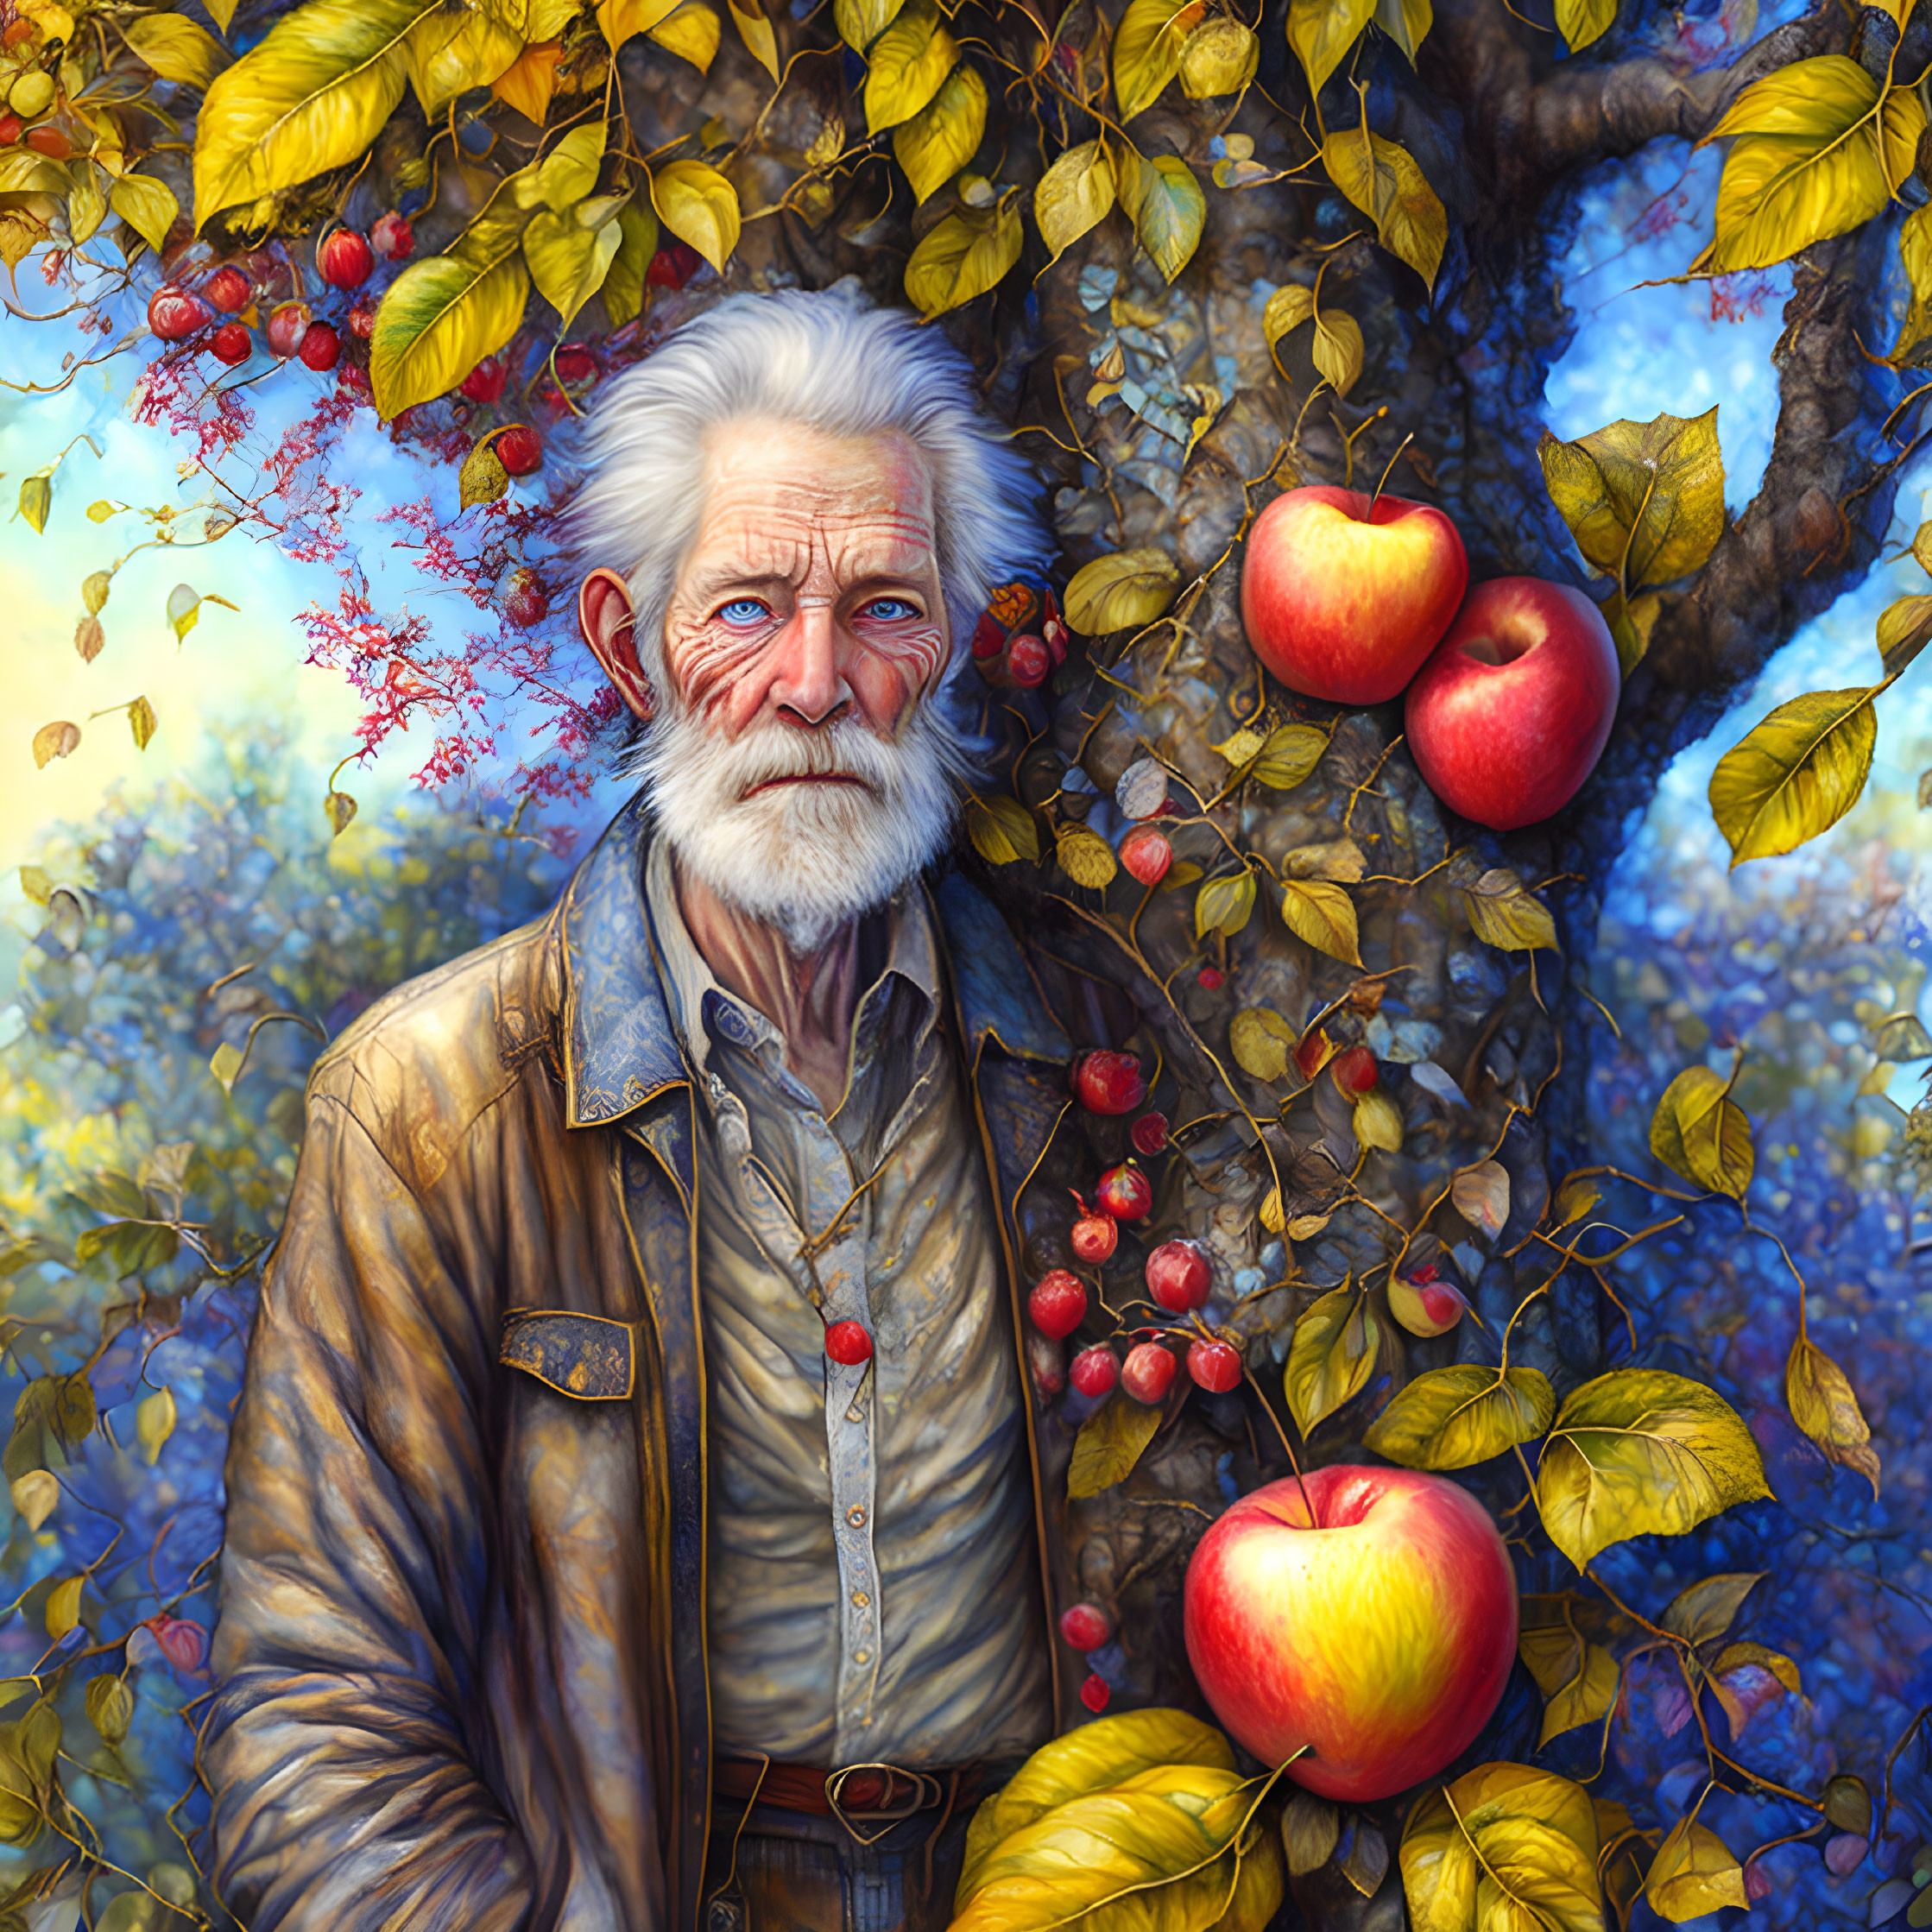 Elderly man with white hair and beard by apple tree full of red apples